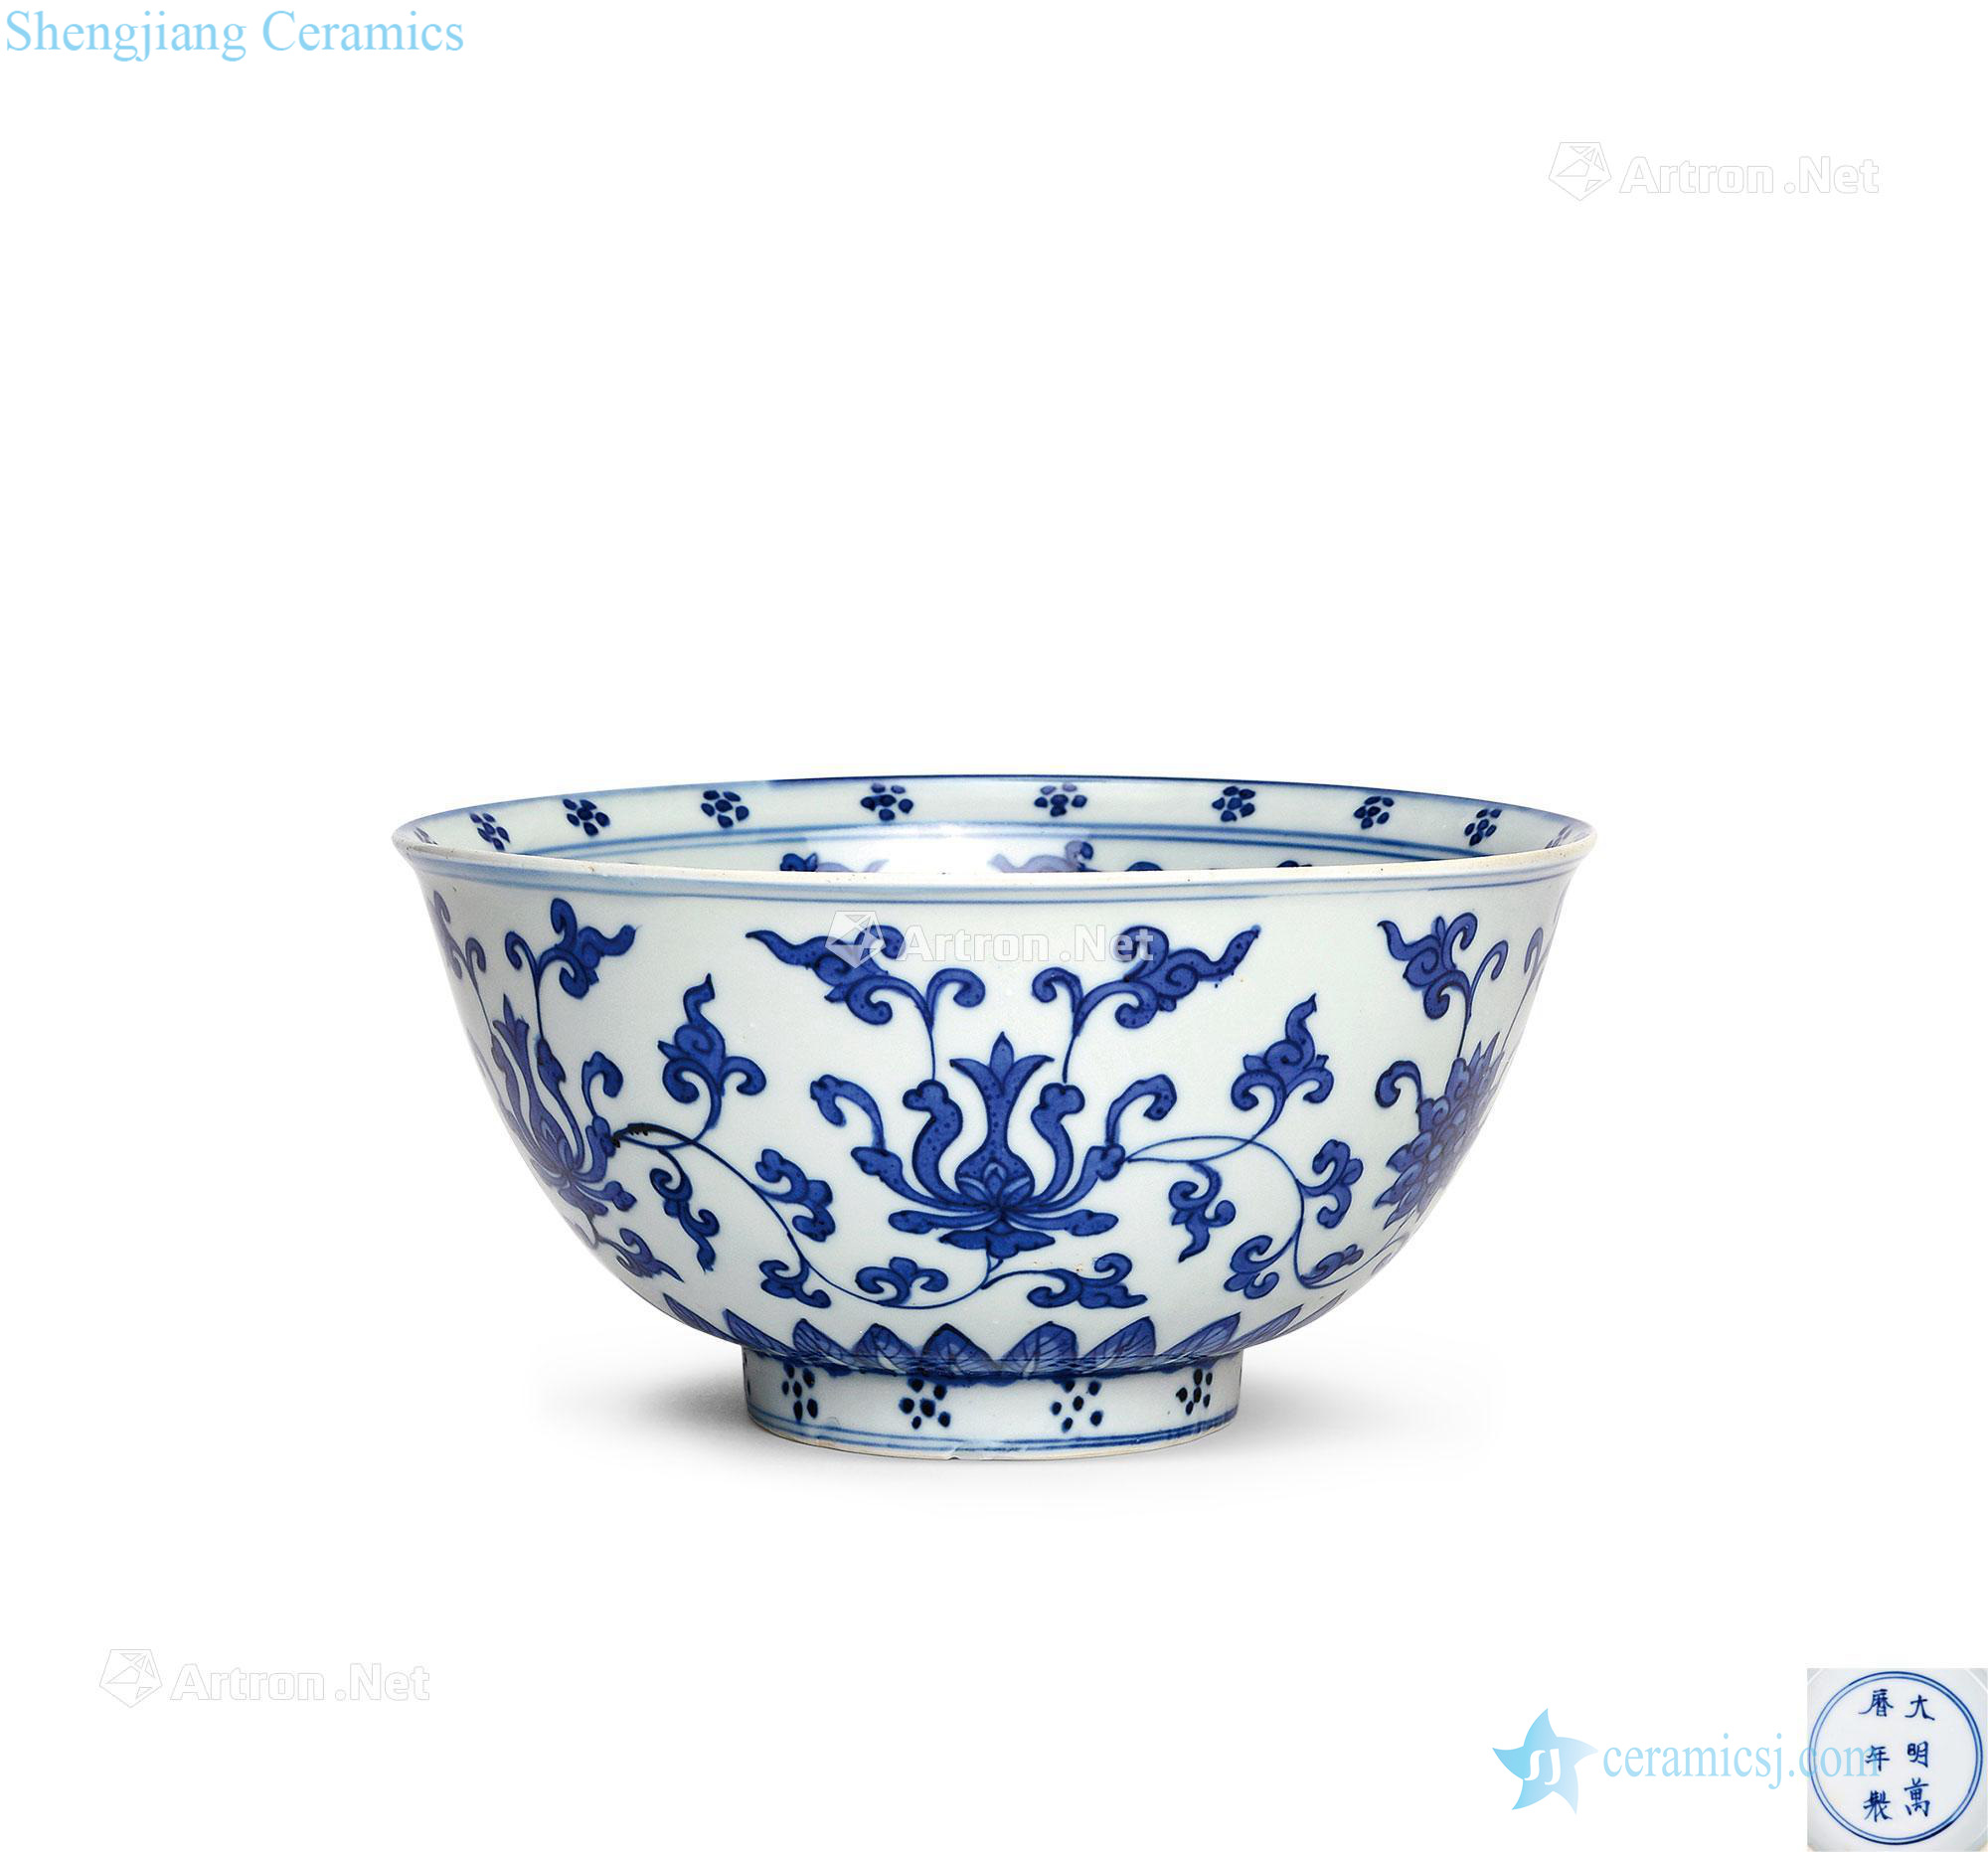 Ming wan 暦 Blue and white tie green-splashed bowls